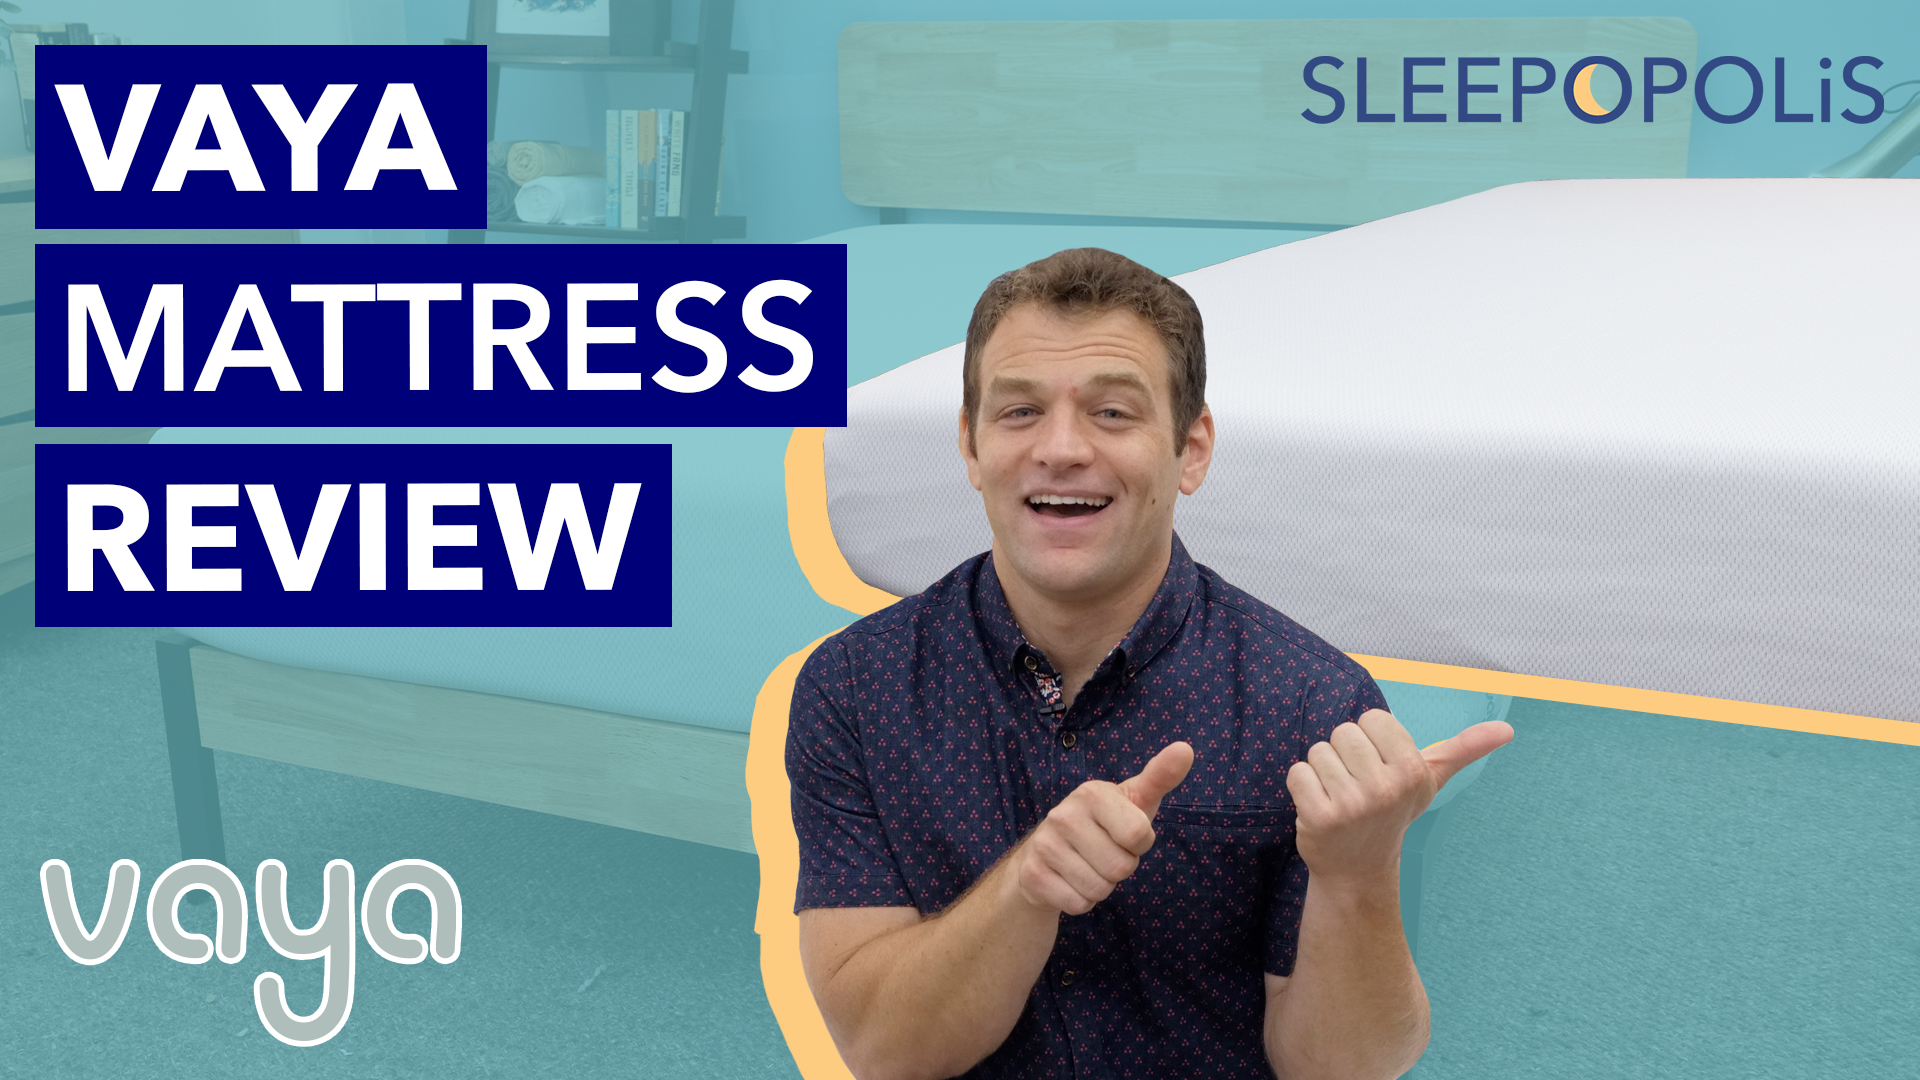 Learn everything you need to know in our full Vaya mattress review so you c...